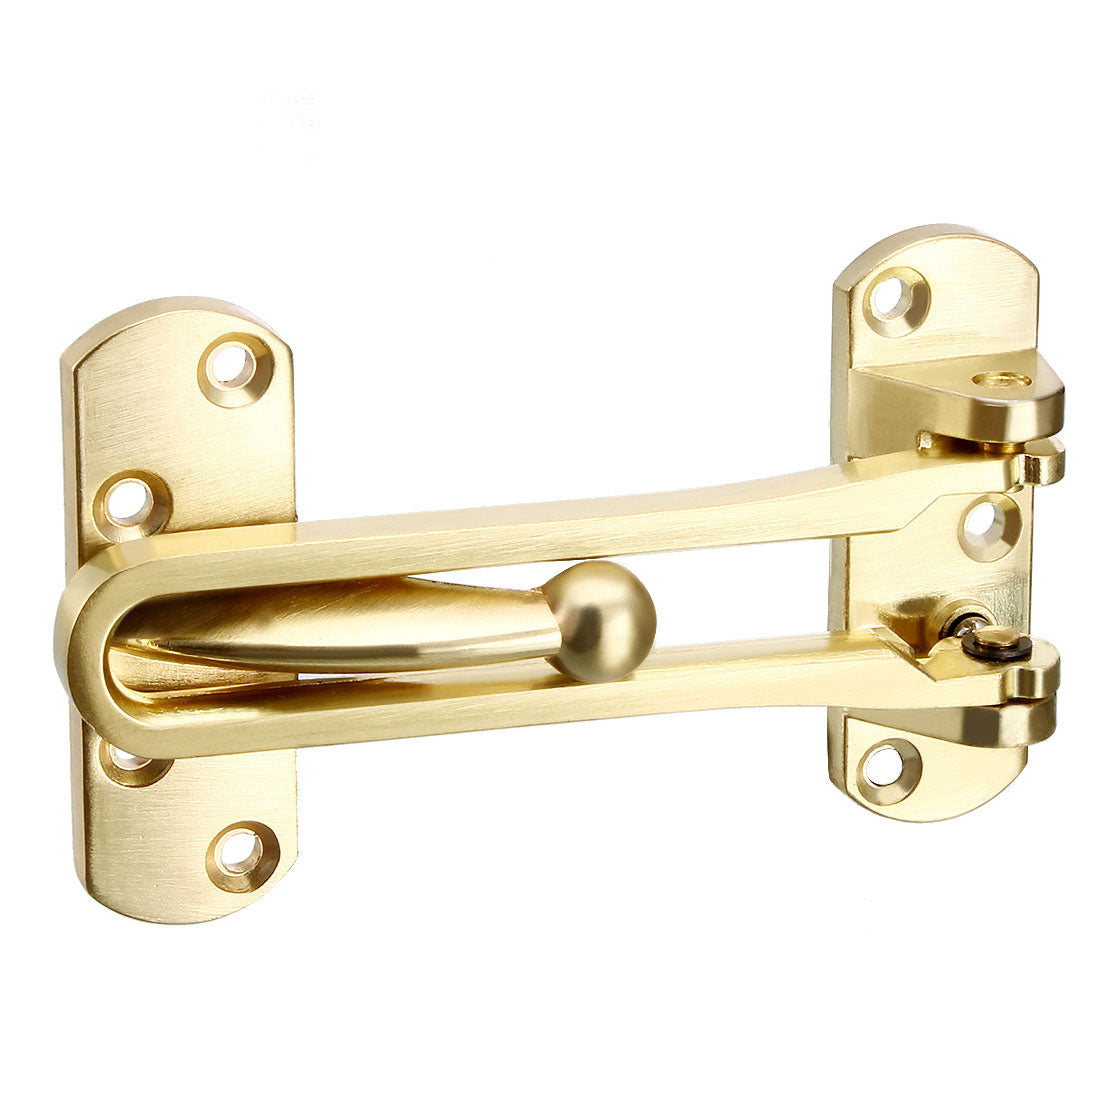 uxcell Uxcell Swing Bar Lock for Hinged Swing Secondary Security Lock for Door and Home Security, 4.13" Bar Length, Golden, Zinc Alloy, 1pc